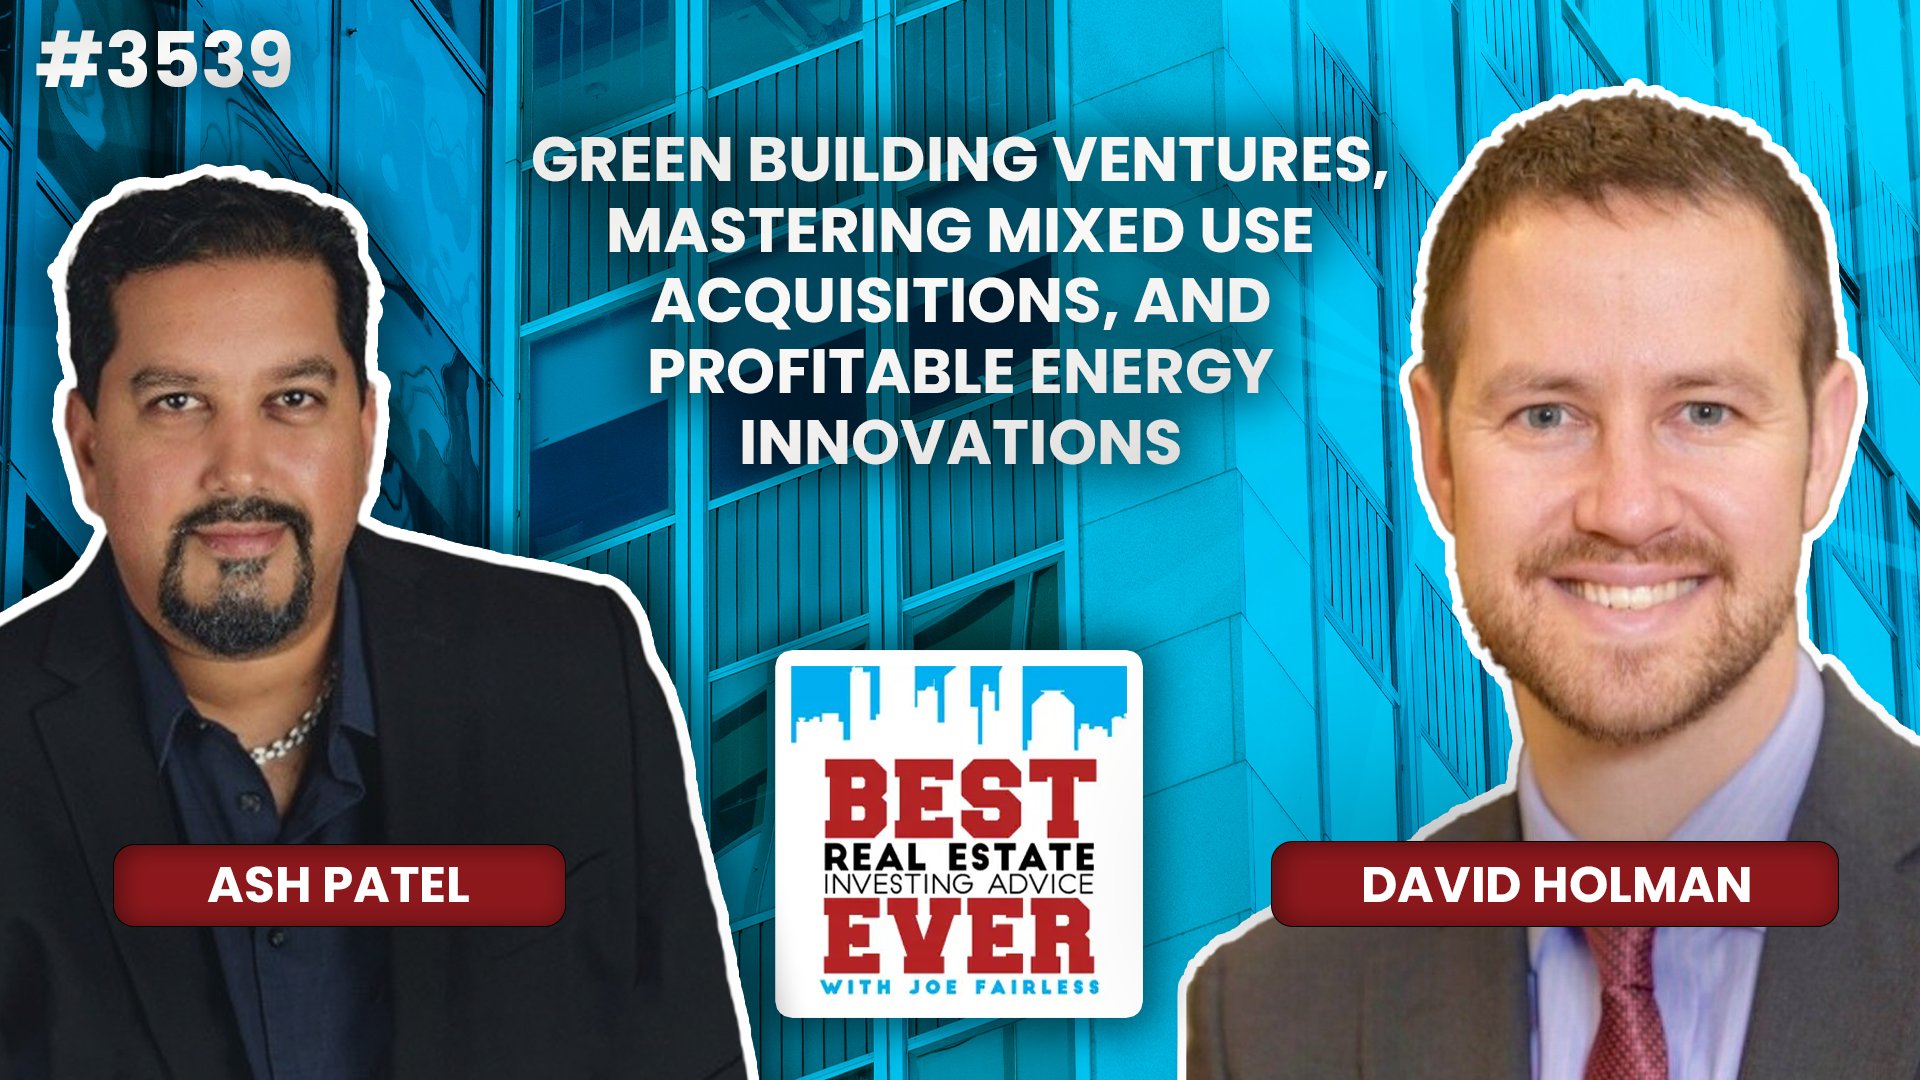 JF3539: Green Building Ventures, Mastering Mixed Use Acquisitions, and Profitable Energy Innovations ft. David Holman